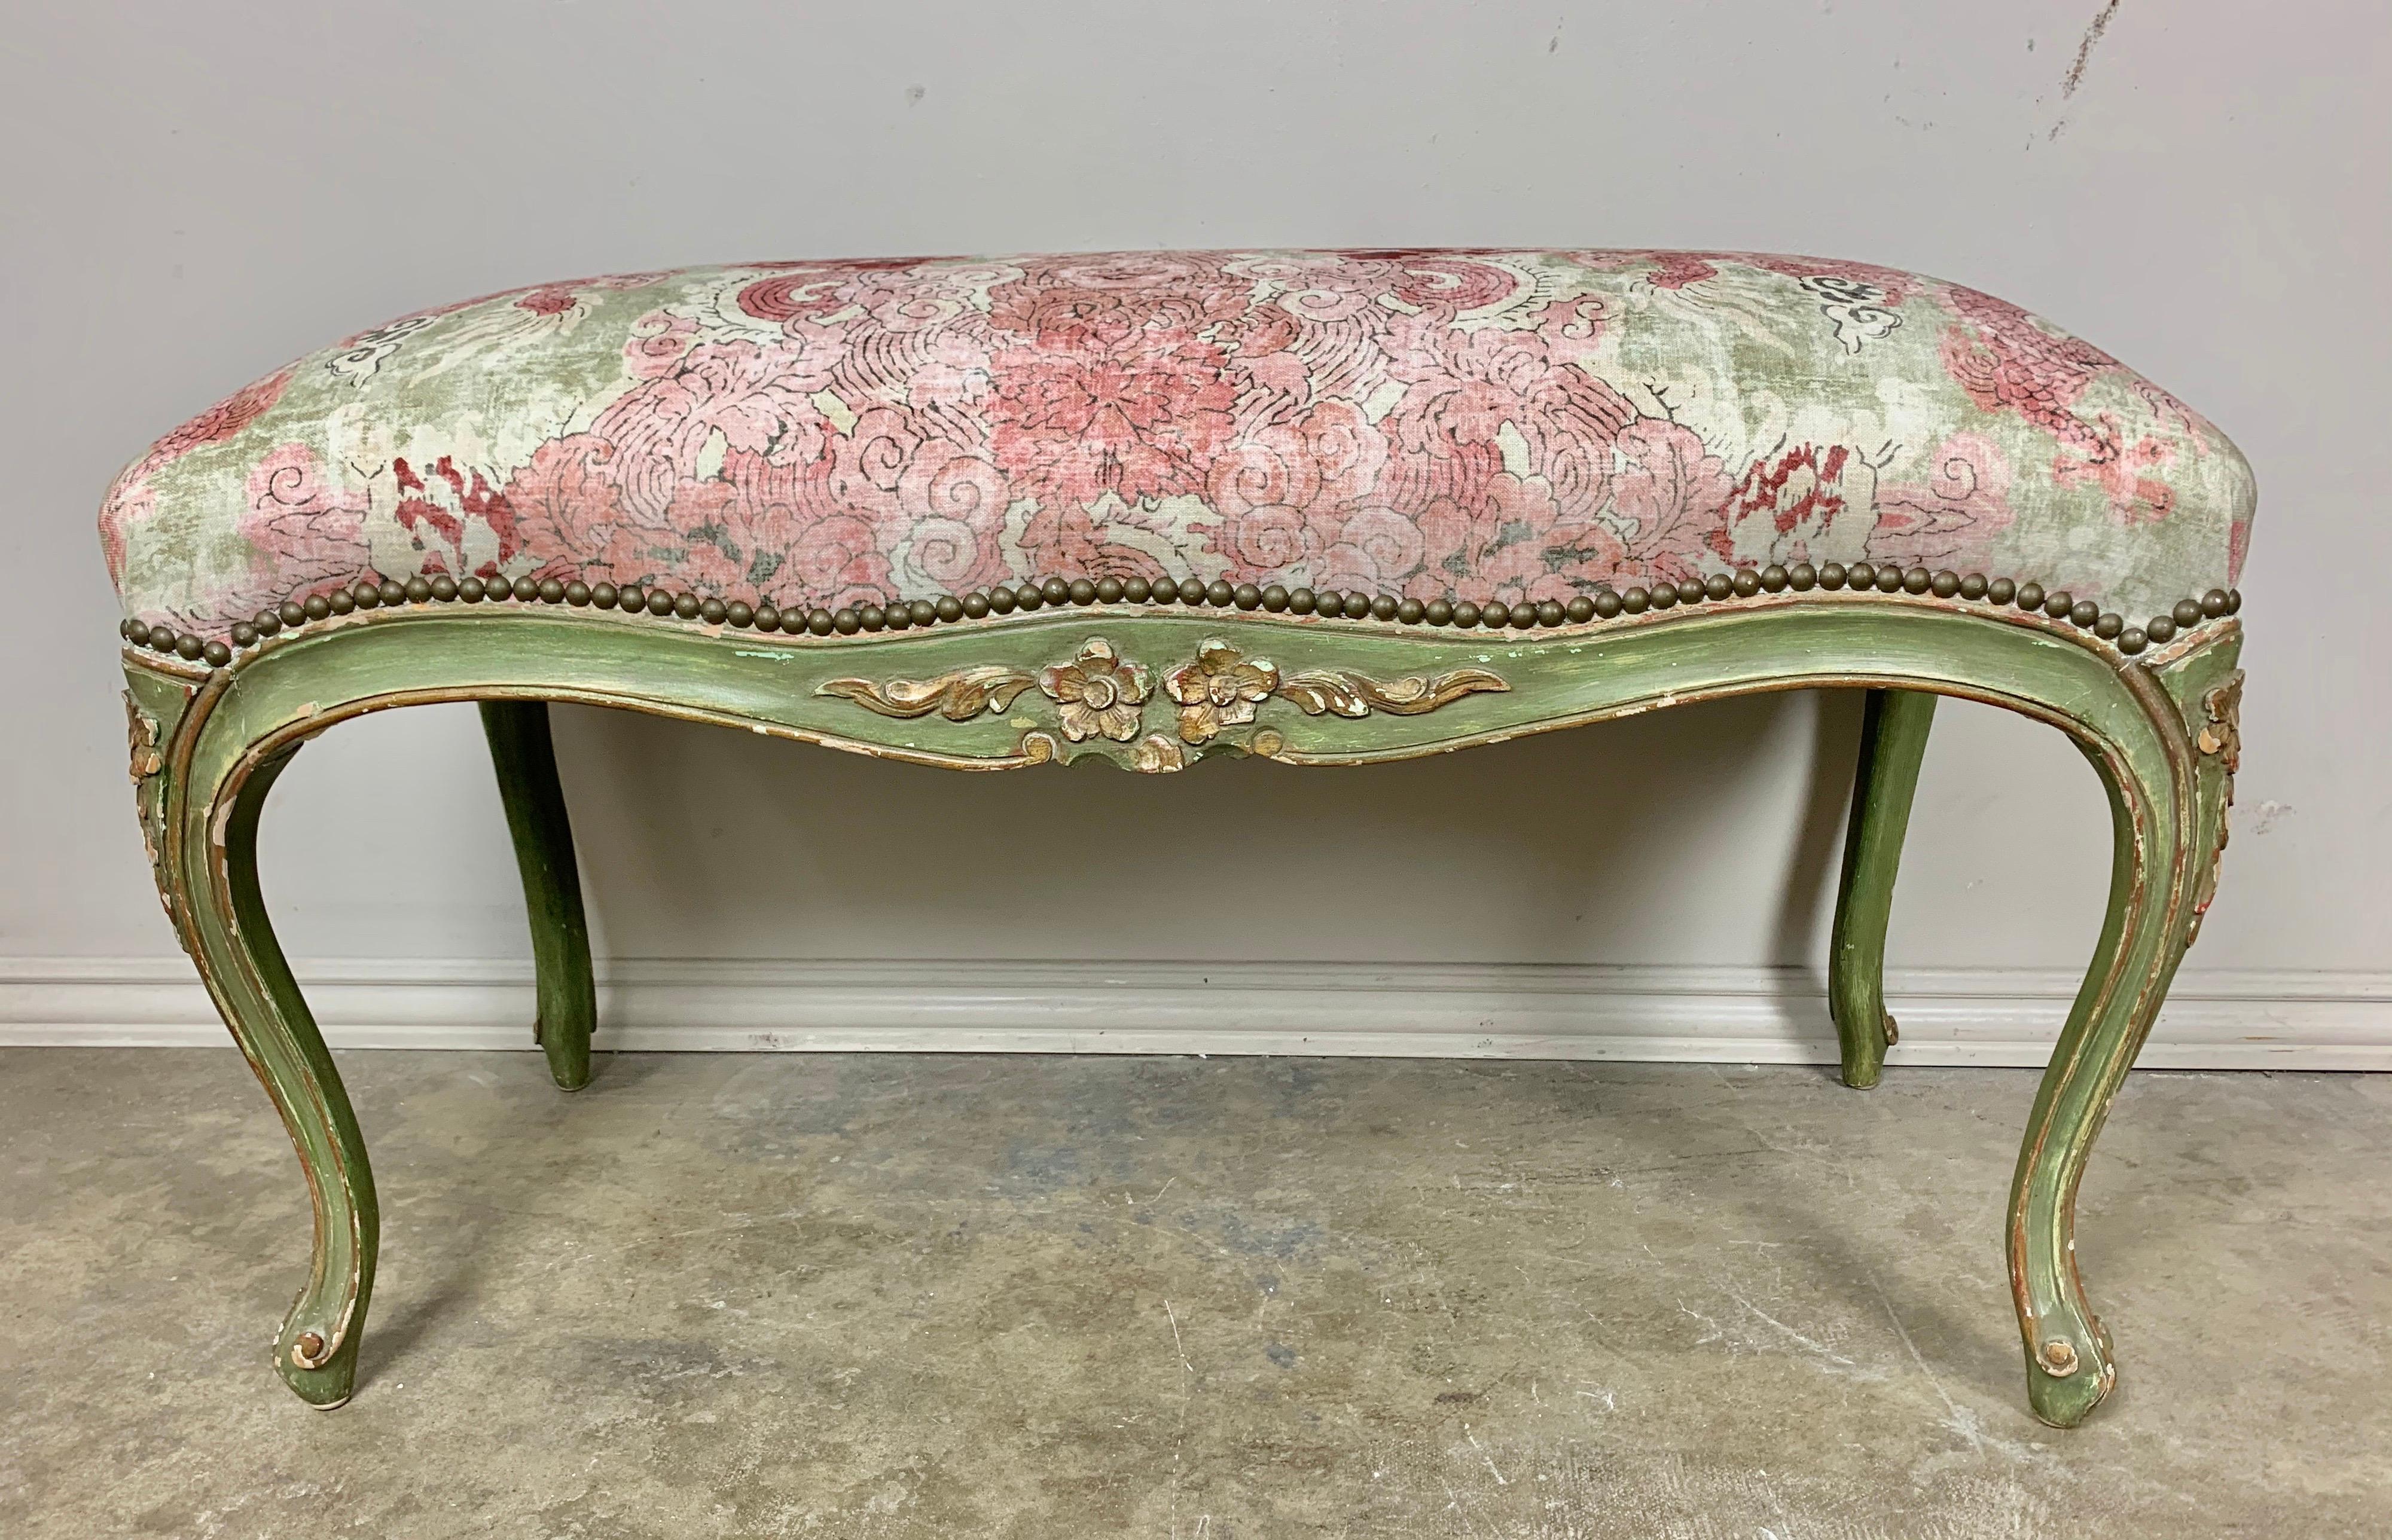 French green painted carved wood bench with carved detailed flowers throughput. The bench stands on four cabriole legs with rams head feet and is newly upholstered in a printed cotton with a whimsical dragon chinoiserie design. Nail head trim detail.